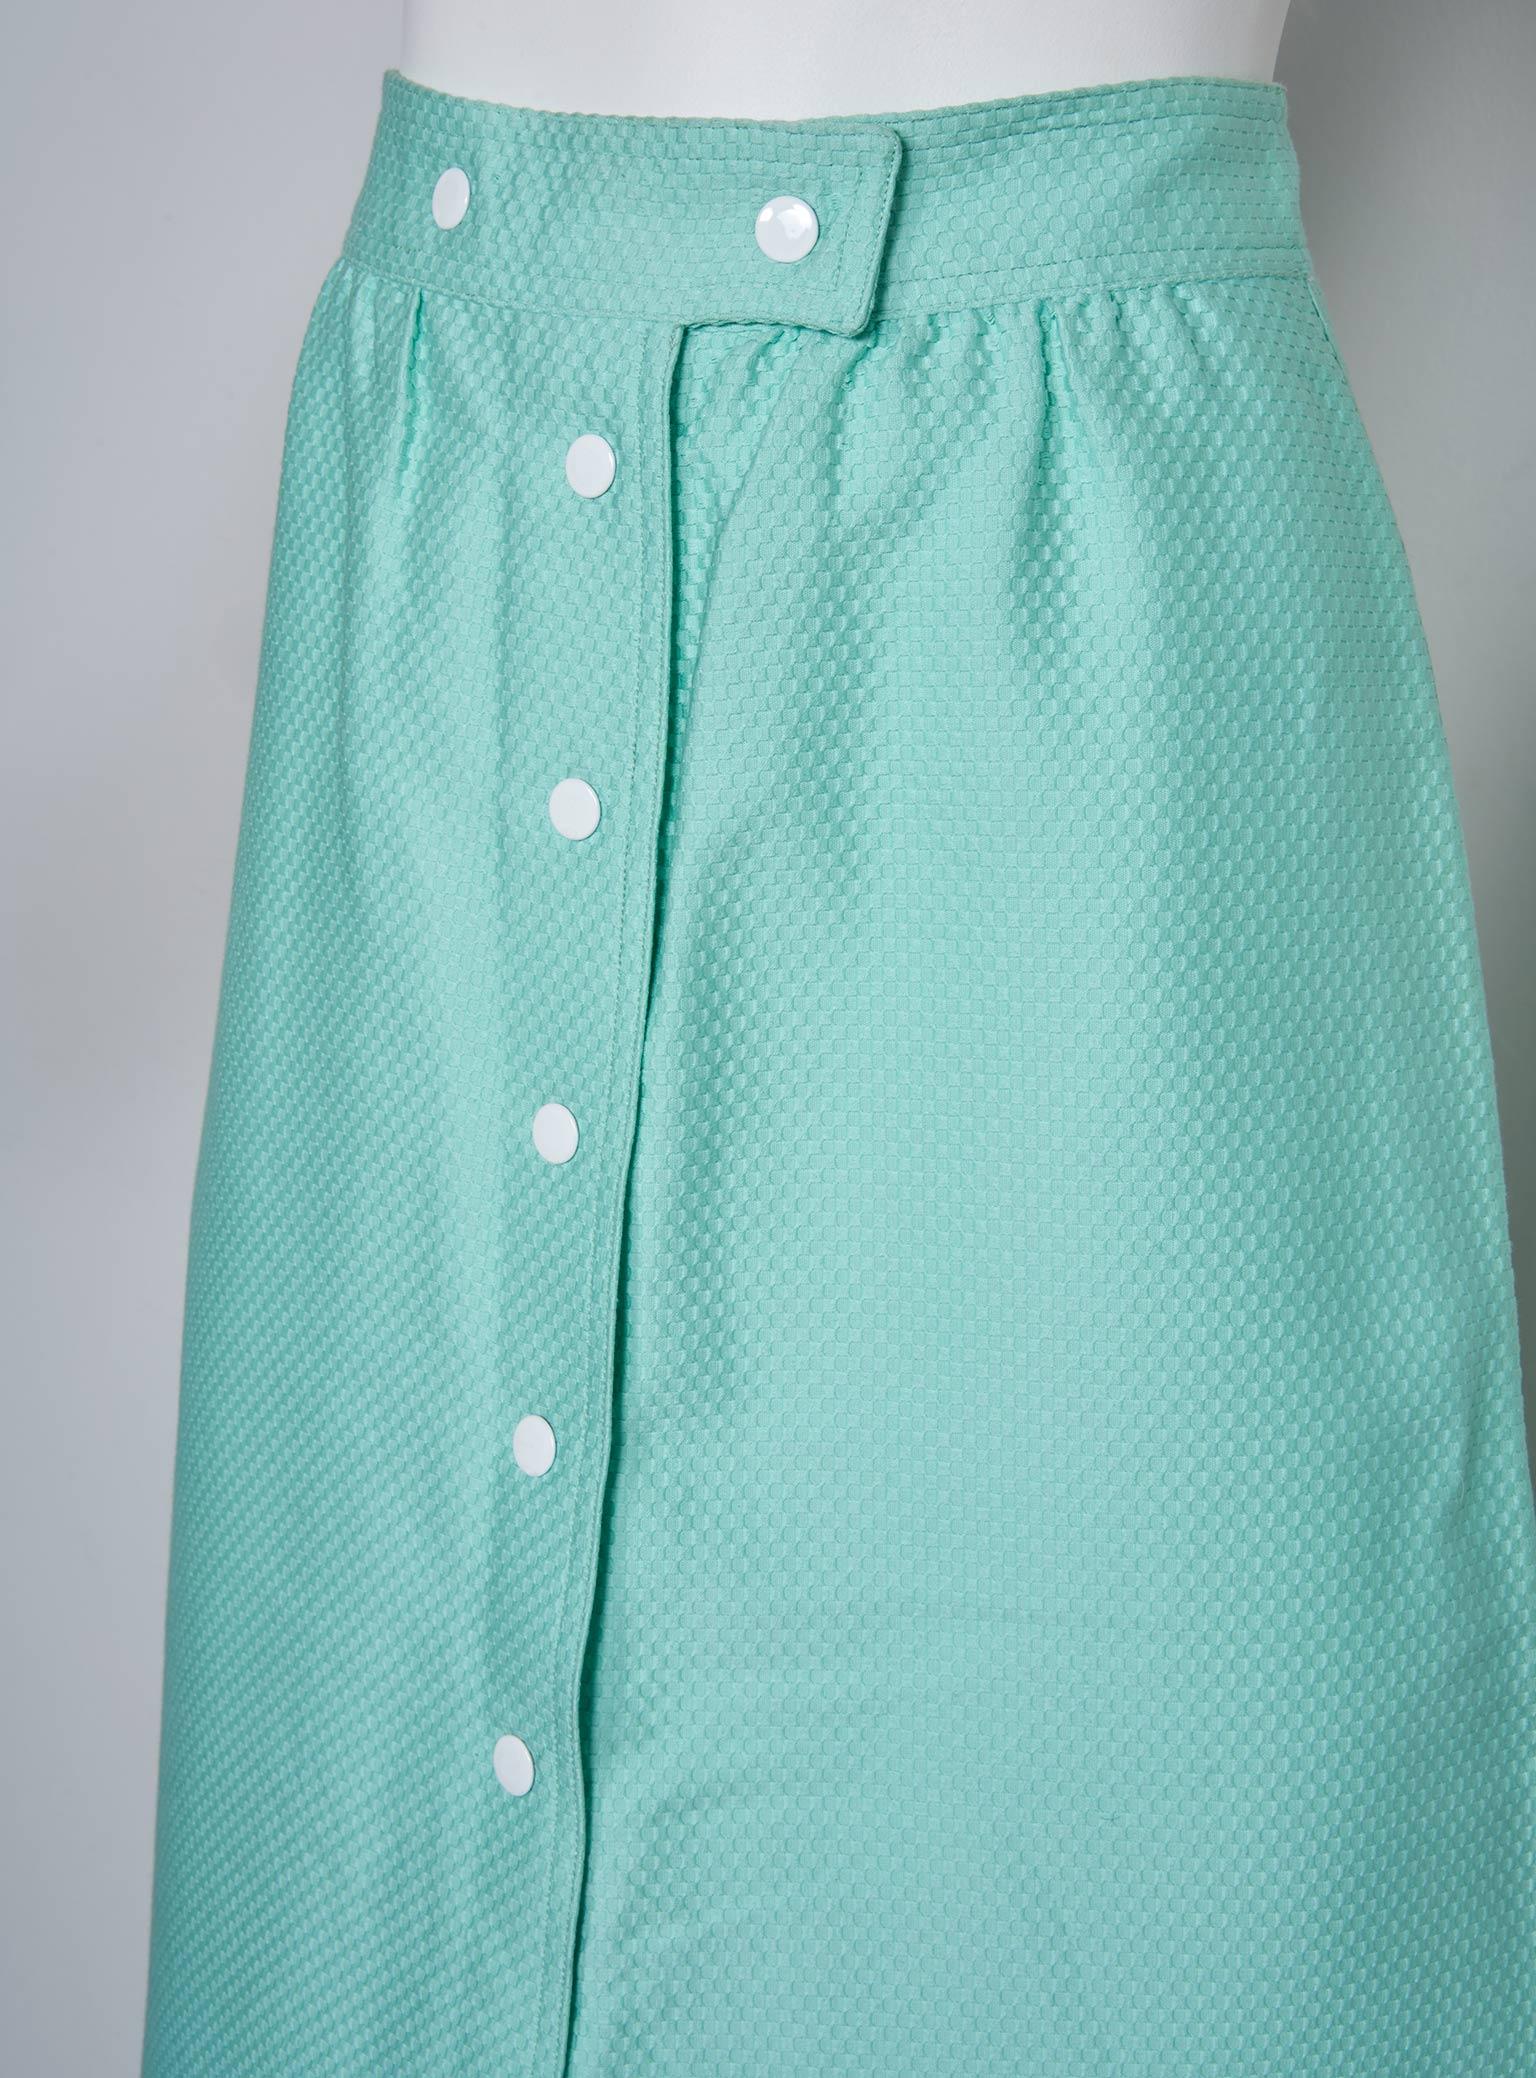 Cotton Courreges Maxi-Skirt with Original Tags For Sale